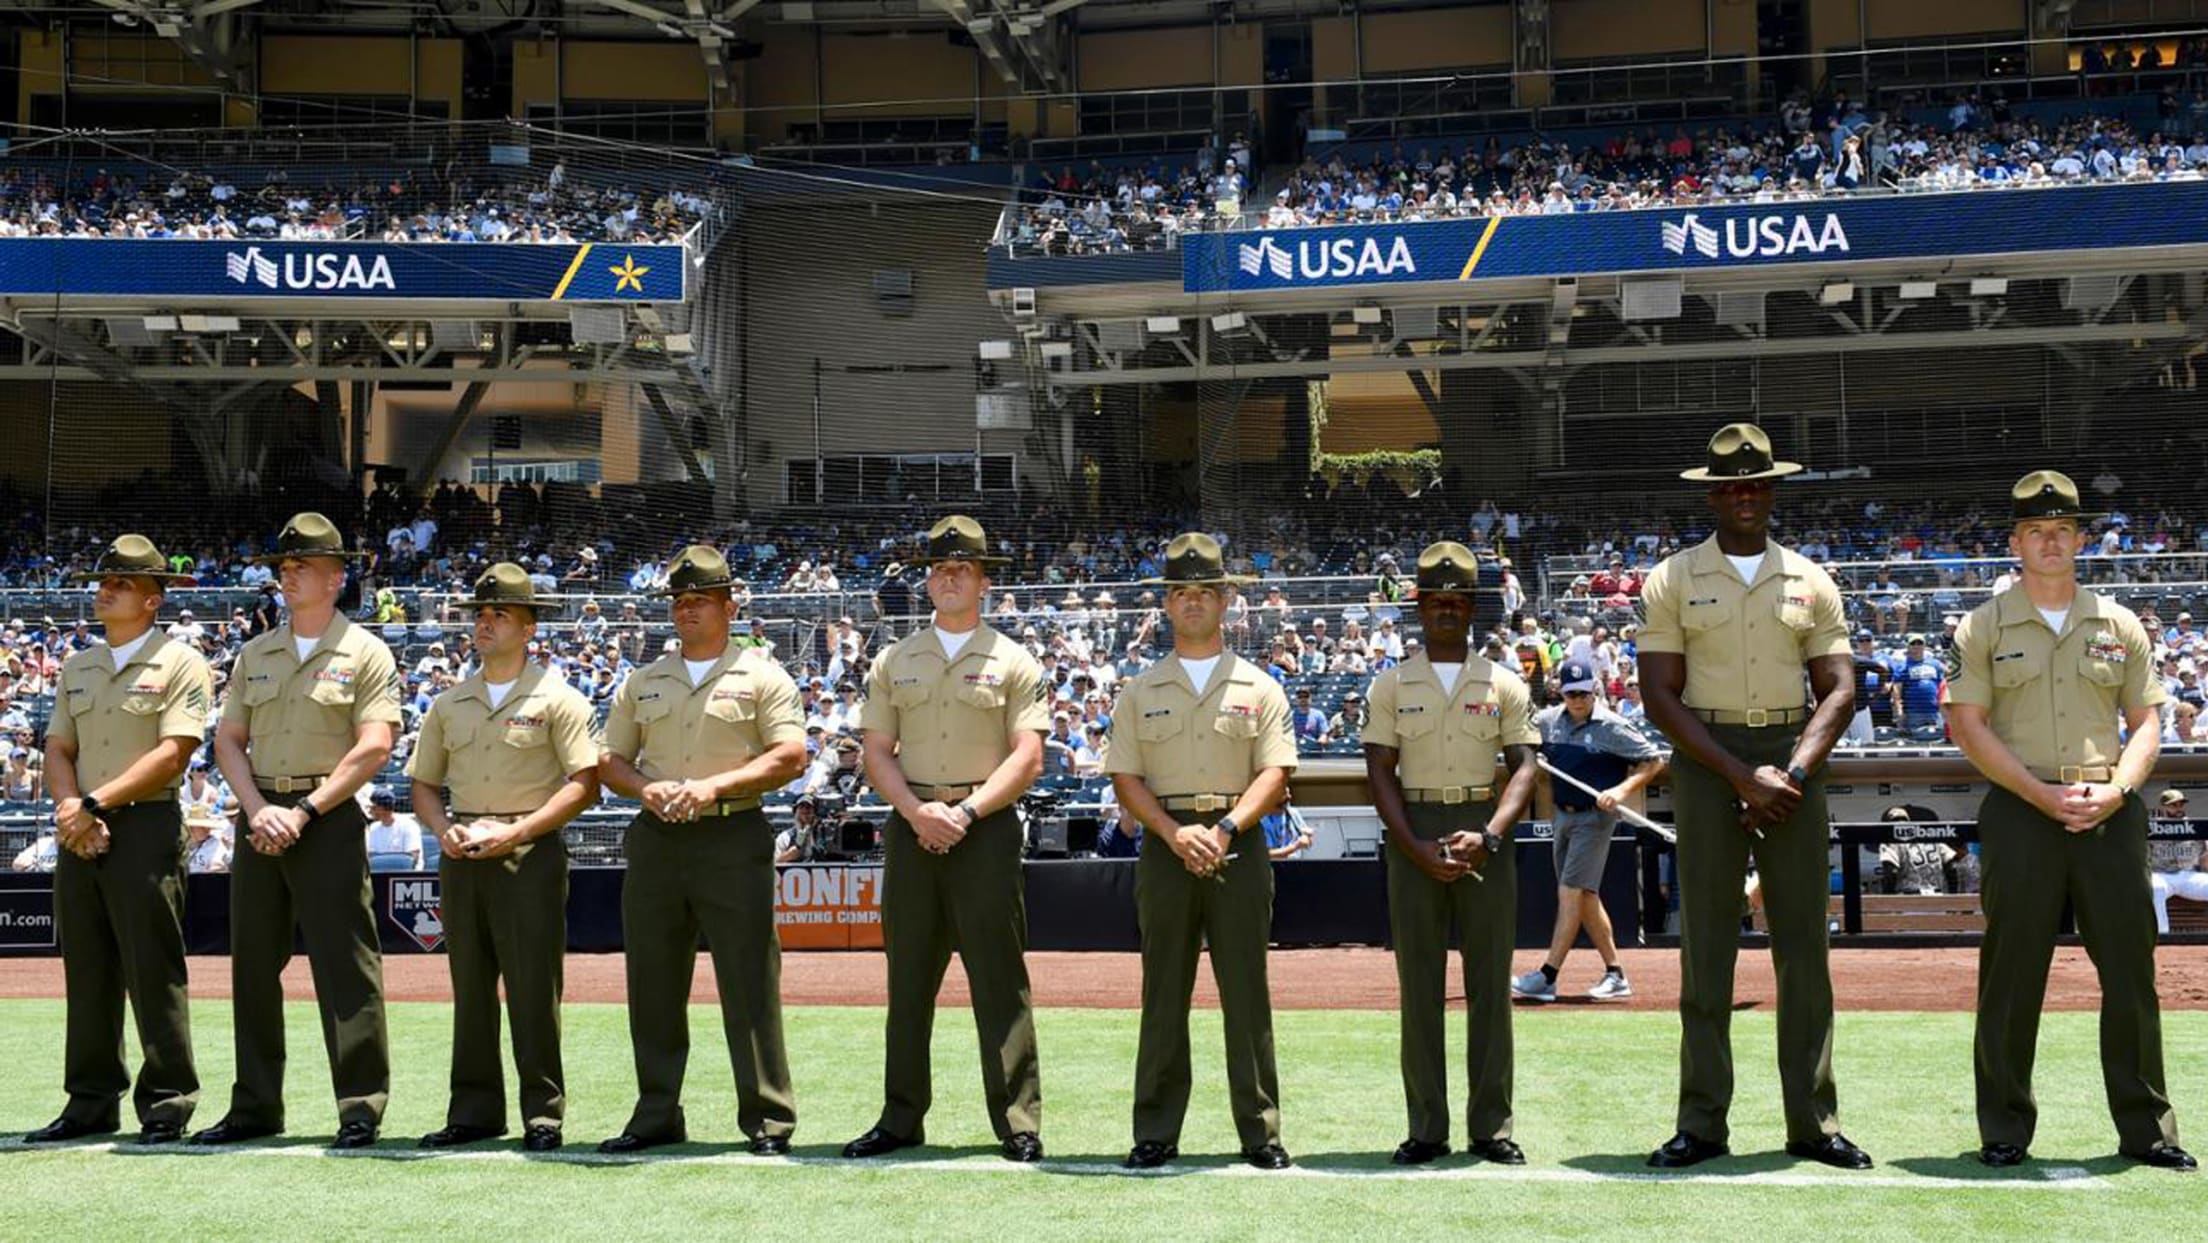 Military free to San Diego Padres game – Orange County Register